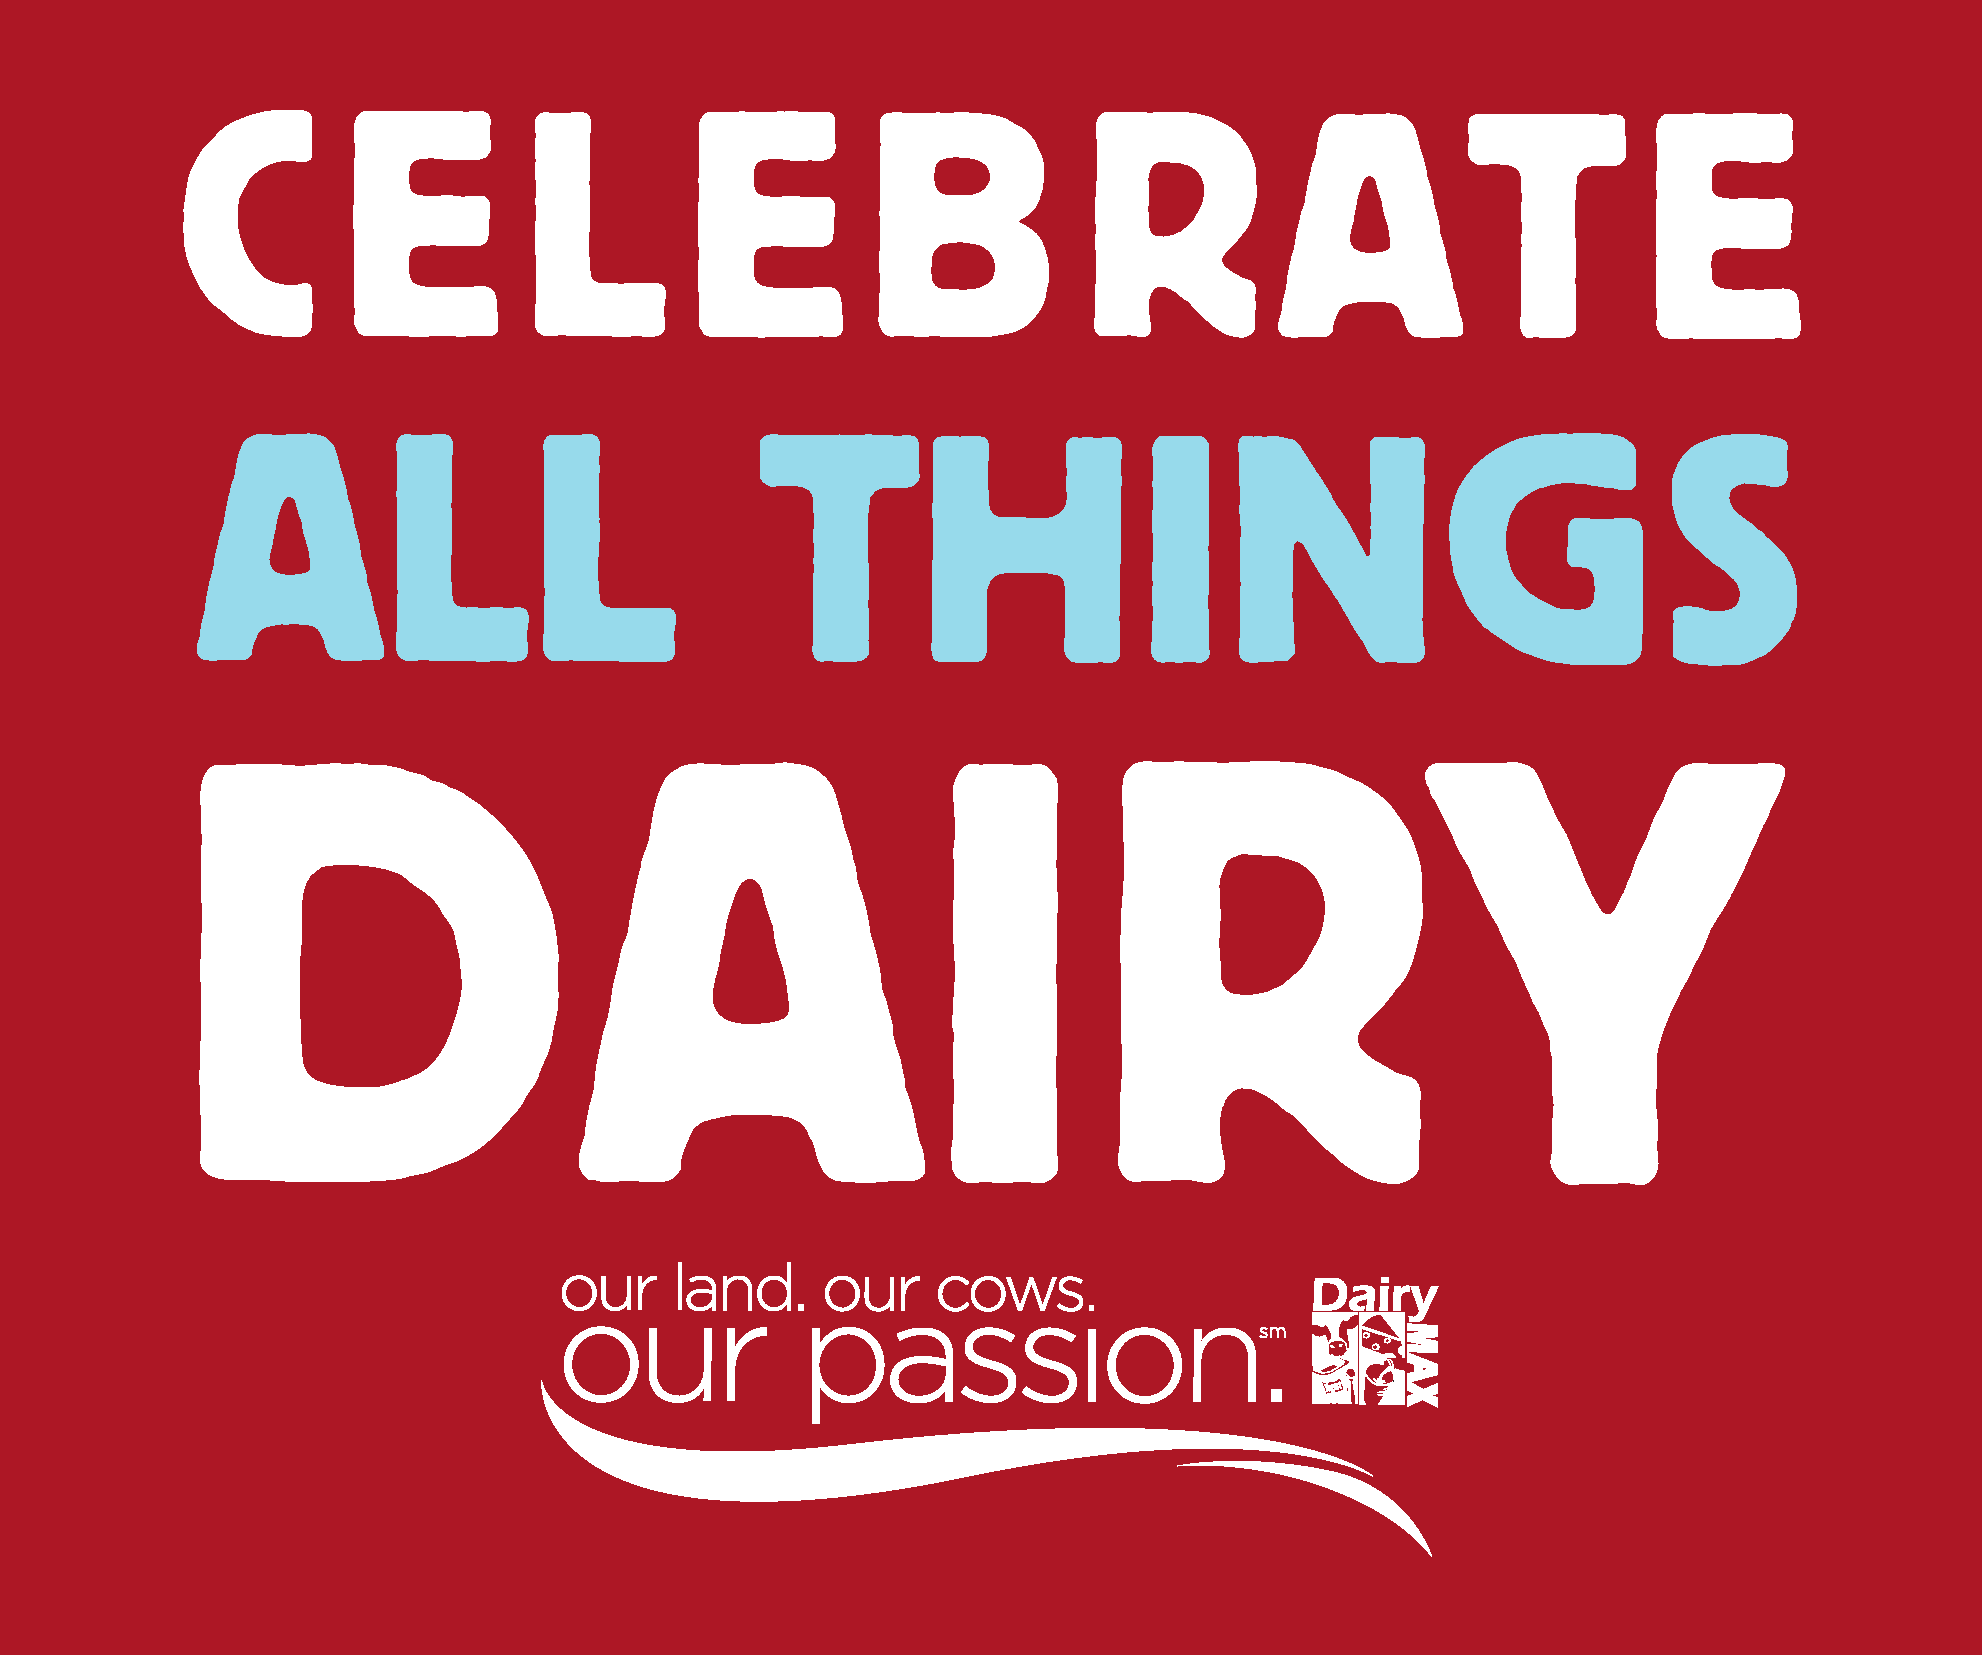 Dairy MAX Celebrates National Dairy Month